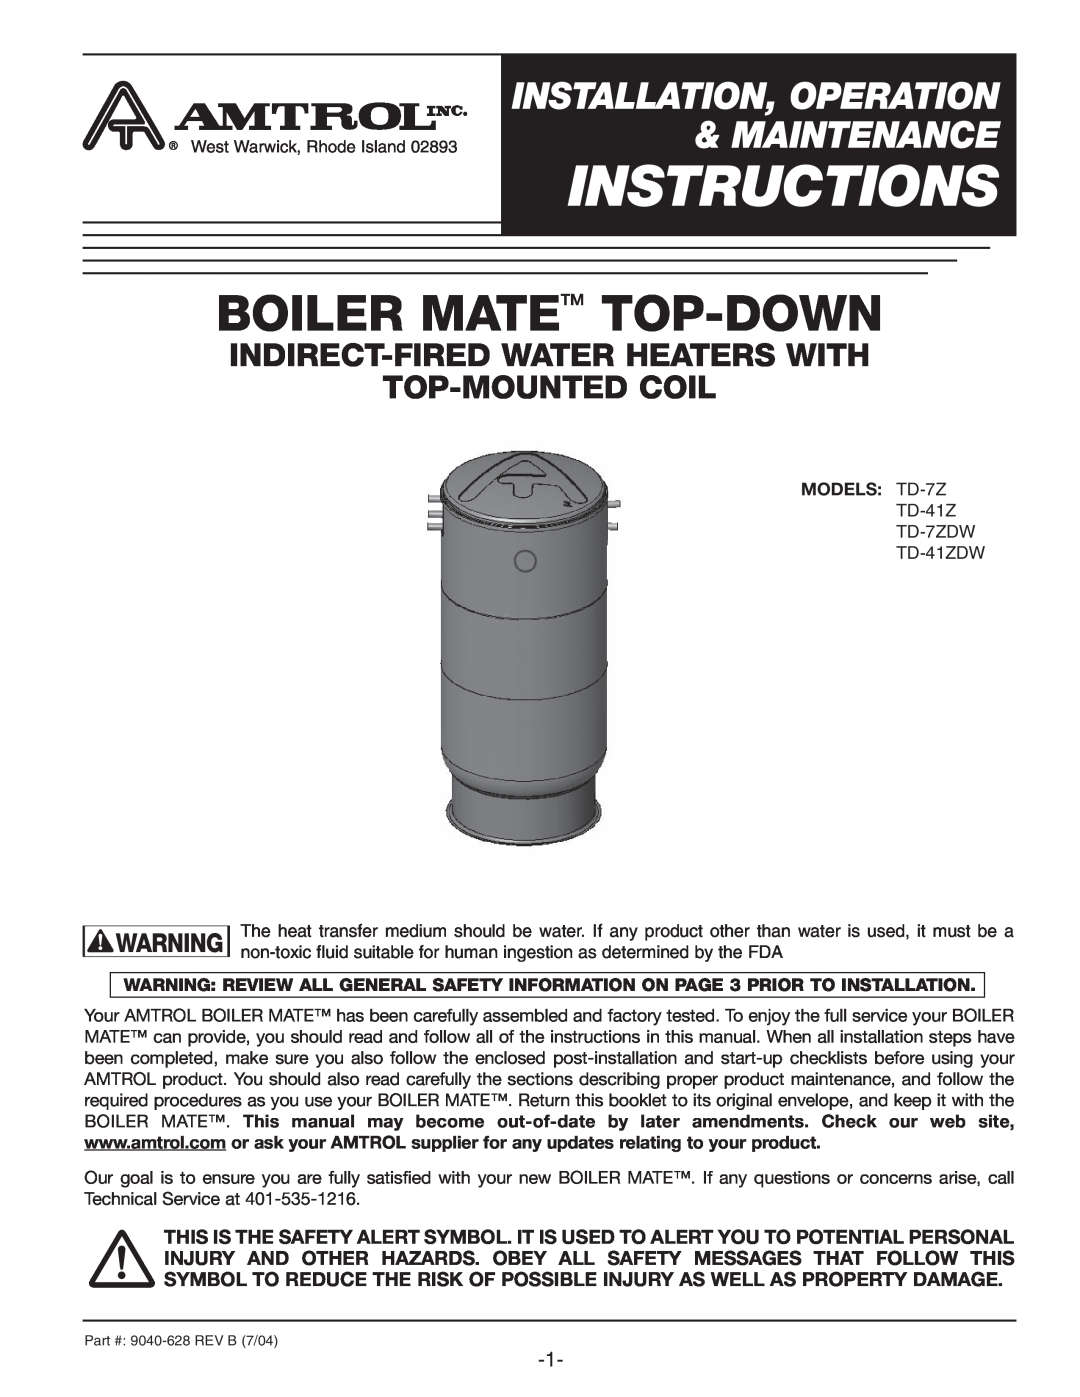 Amtrol TD-7ZDW manual Indirect-Firedwater Heaters With Top-Mountedcoil, MODELS TD-7Z, Instructions, Boiler Matetm Top-Down 